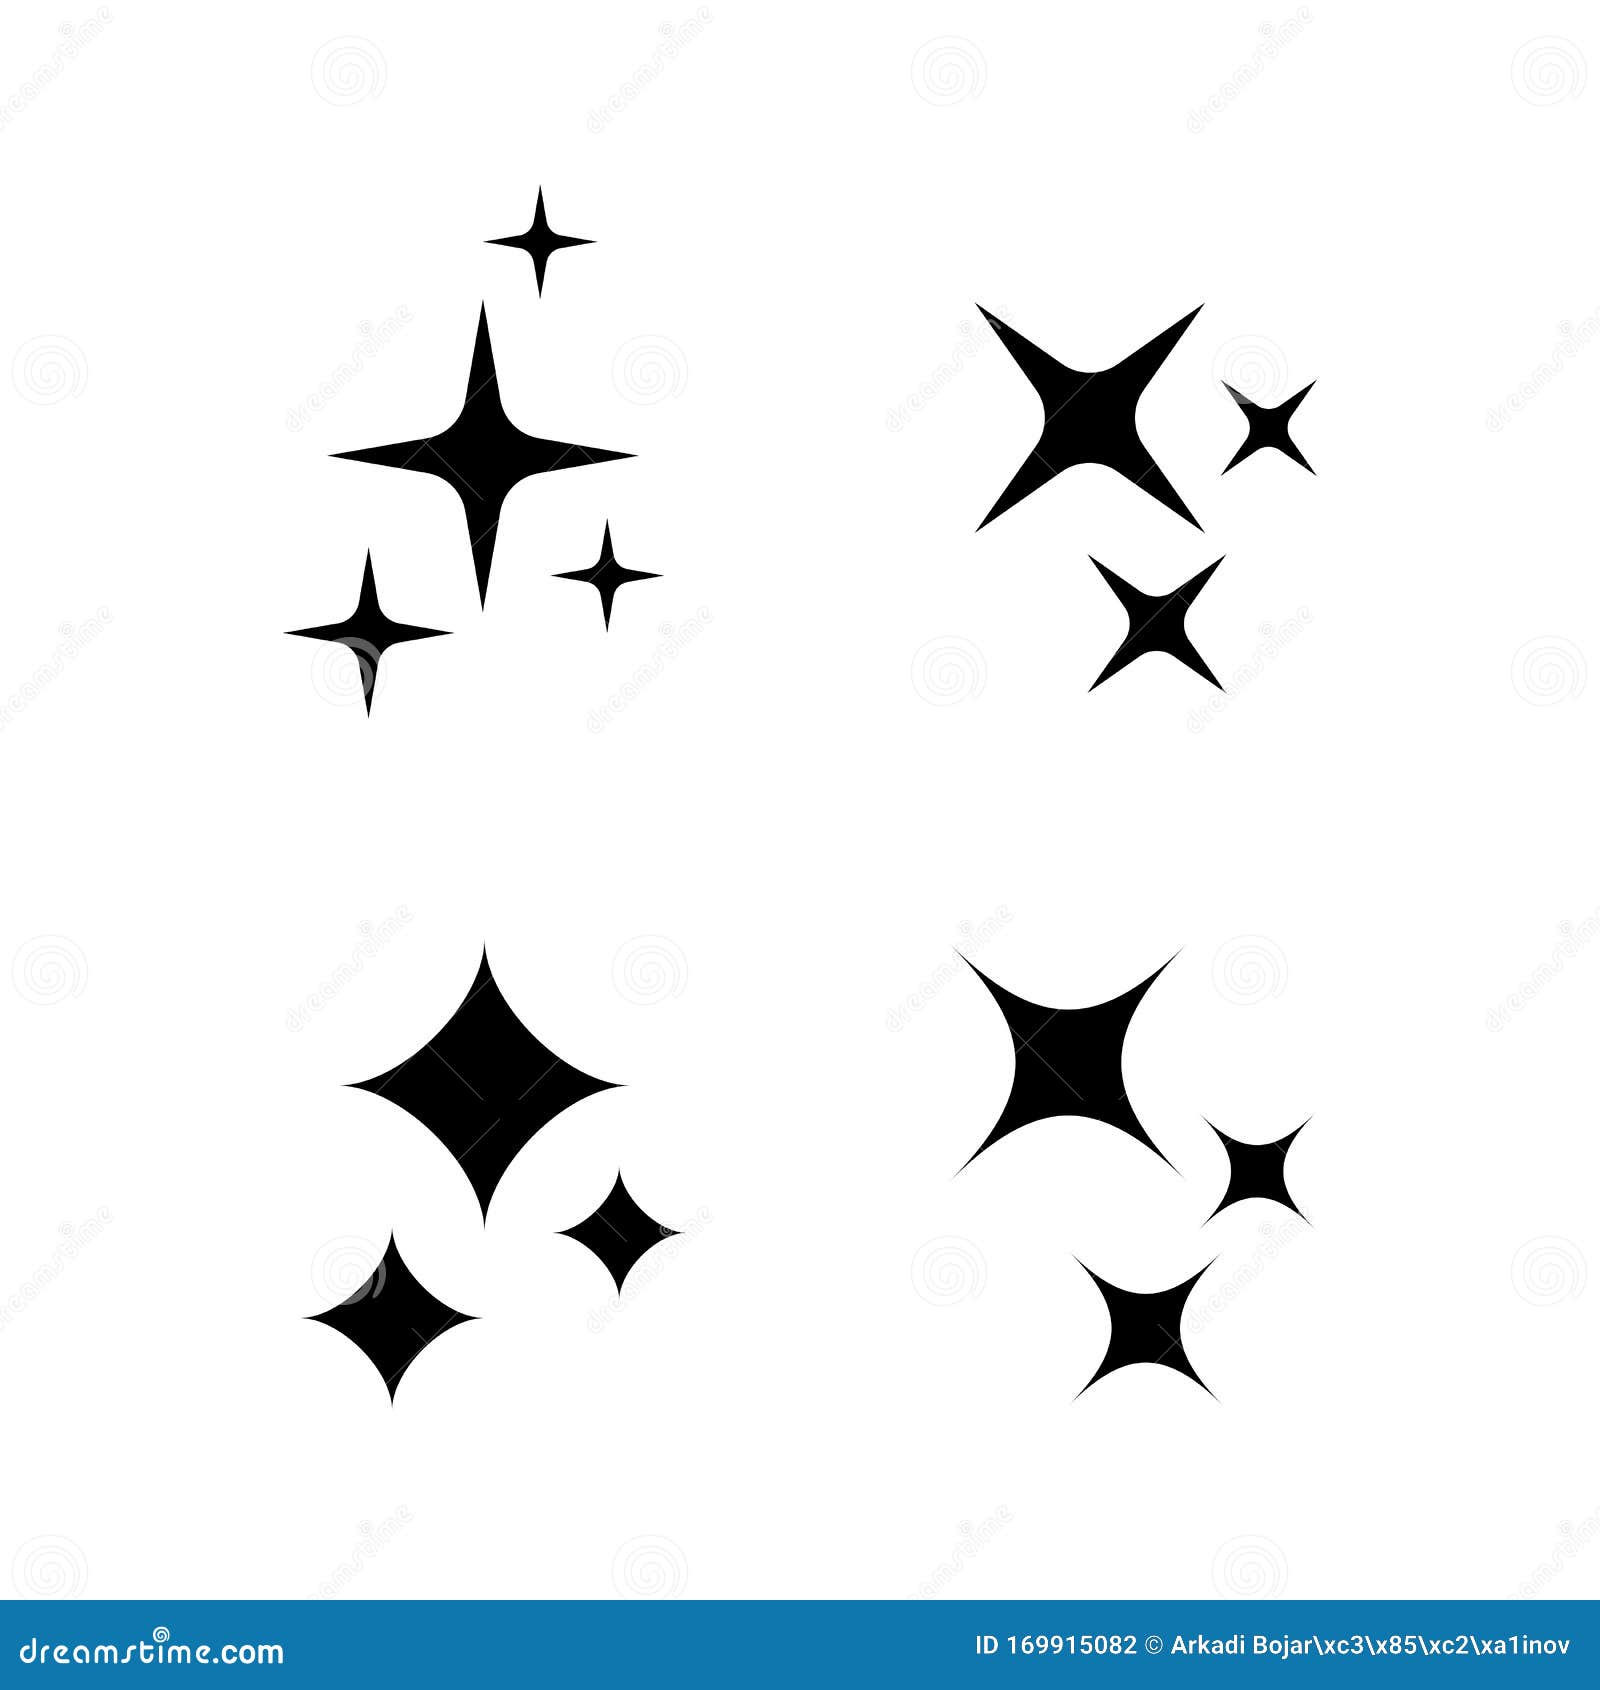 Sparkle stars vector icon stock vector. Illustration of glass - 169915082